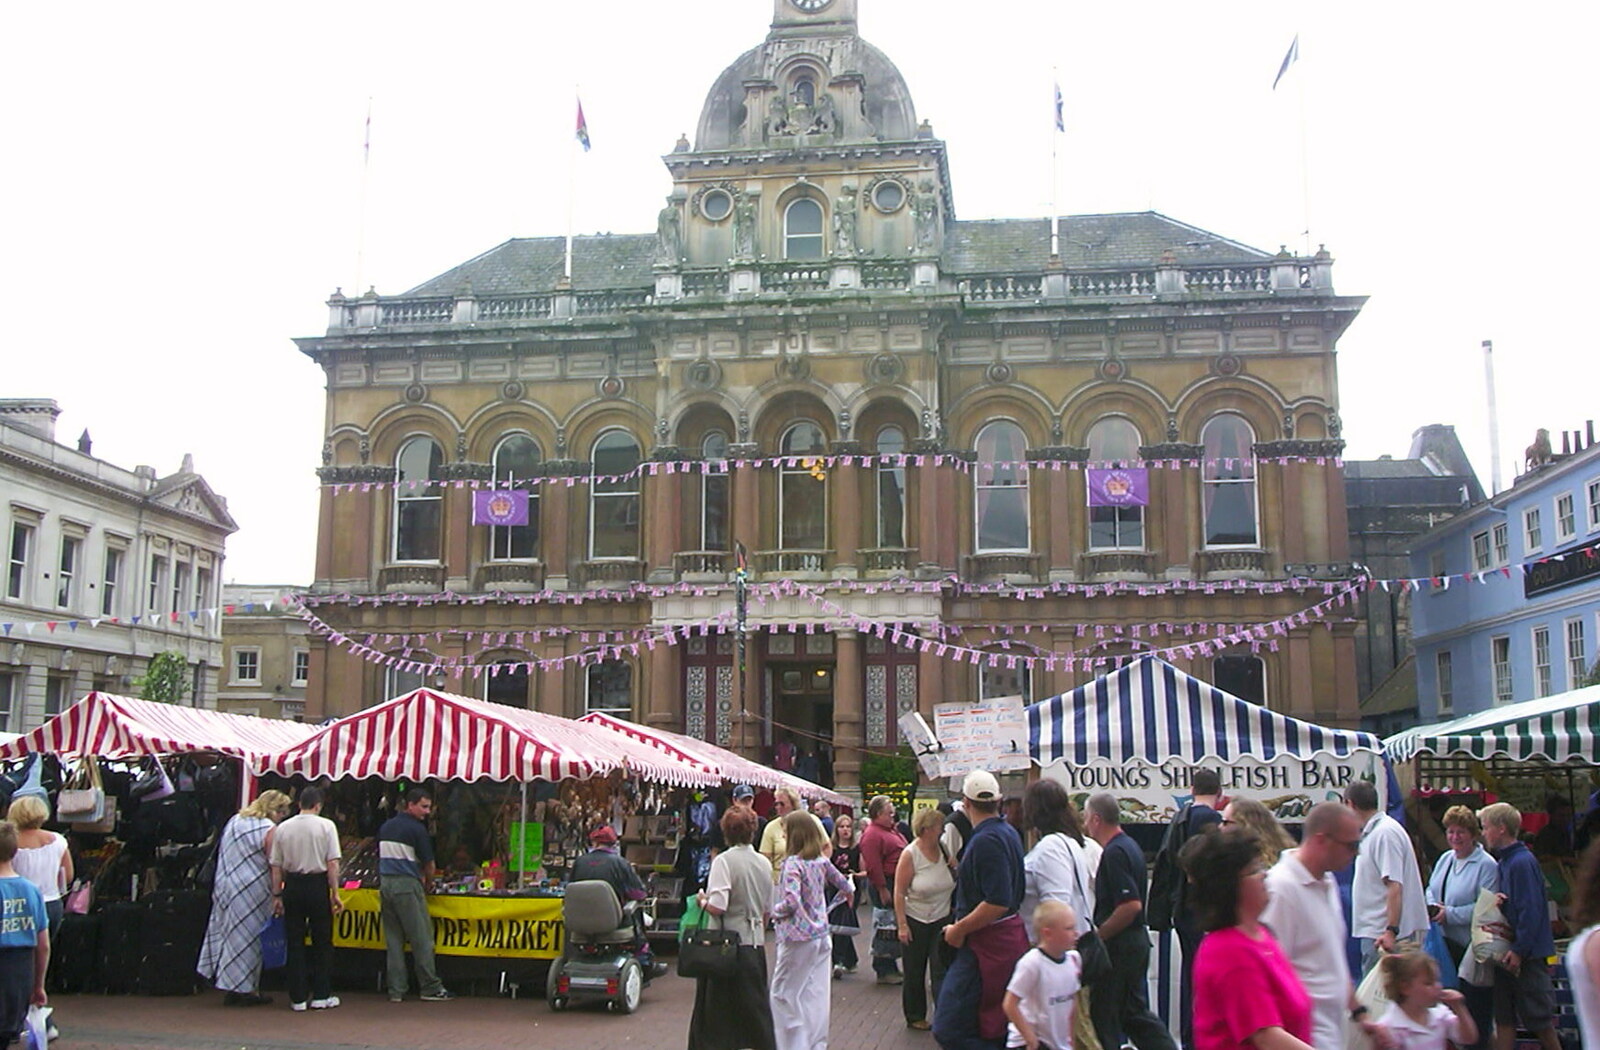 Ipswich Town Hall and market from Radio 1's One Big Sunday, Chantry Park, Ipswich - 14th July 2002